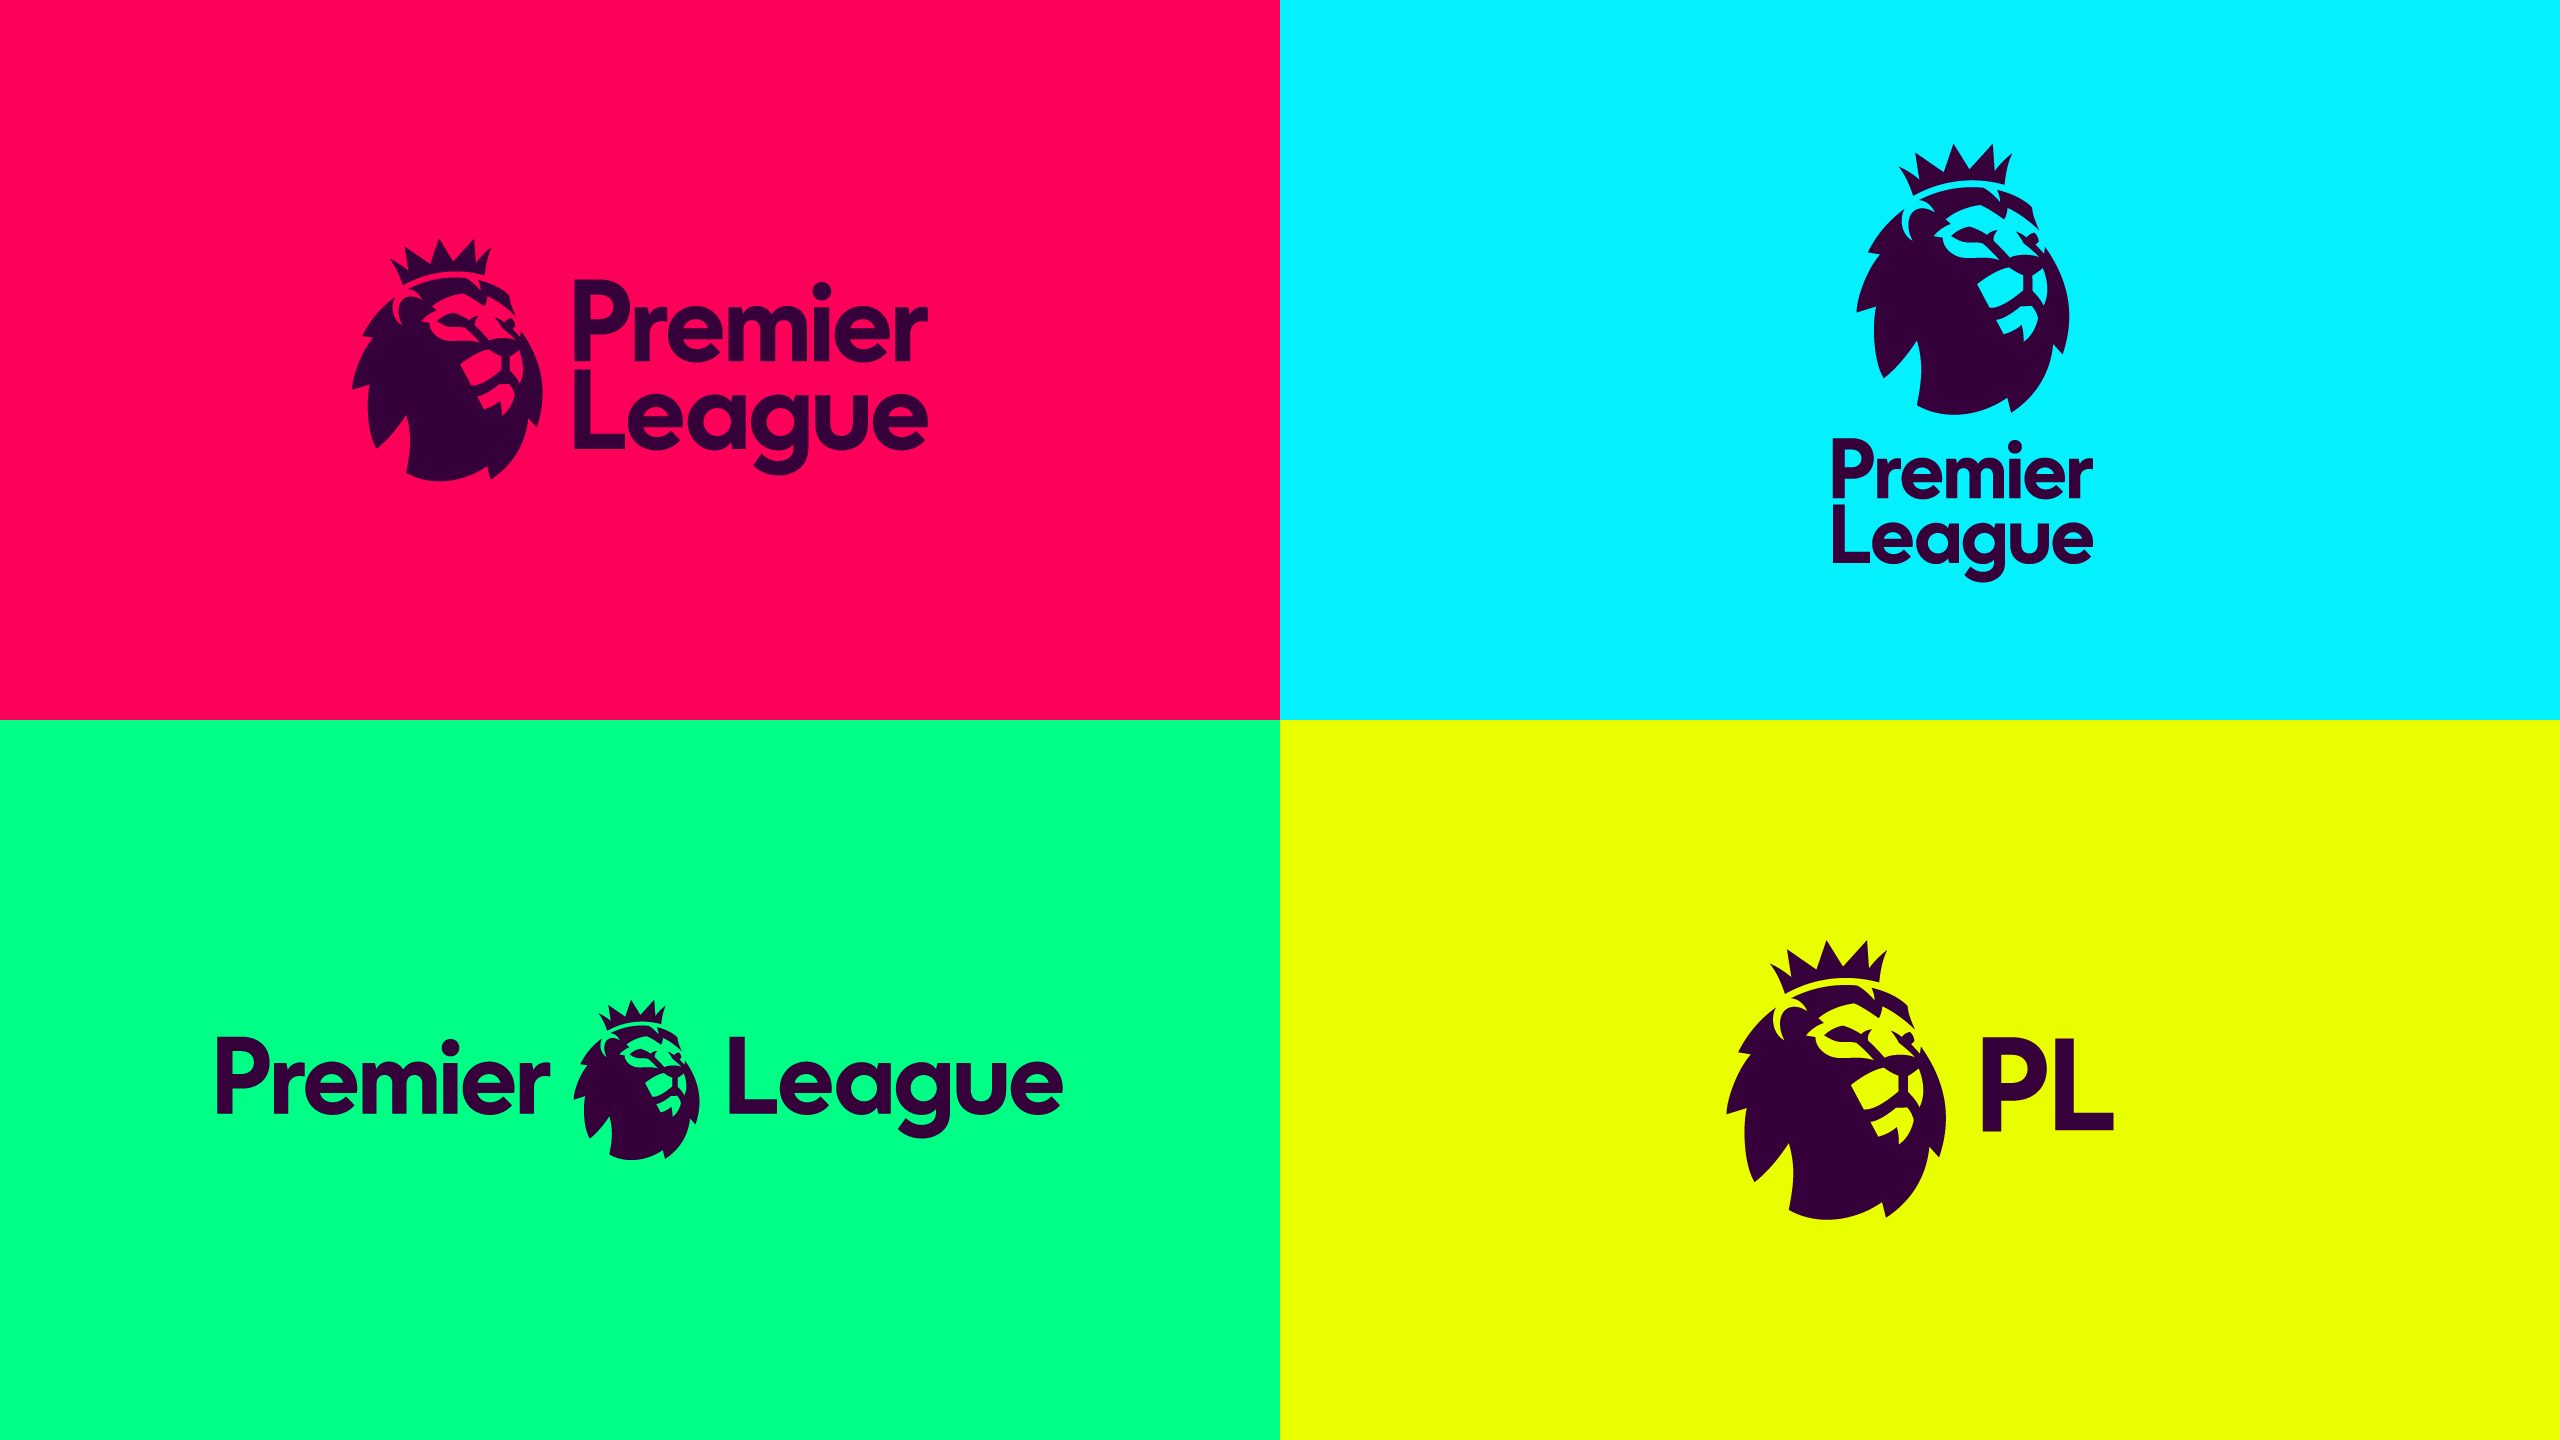 The Premier League's new logo feature's a lion's head, facing to the right as if looking forward